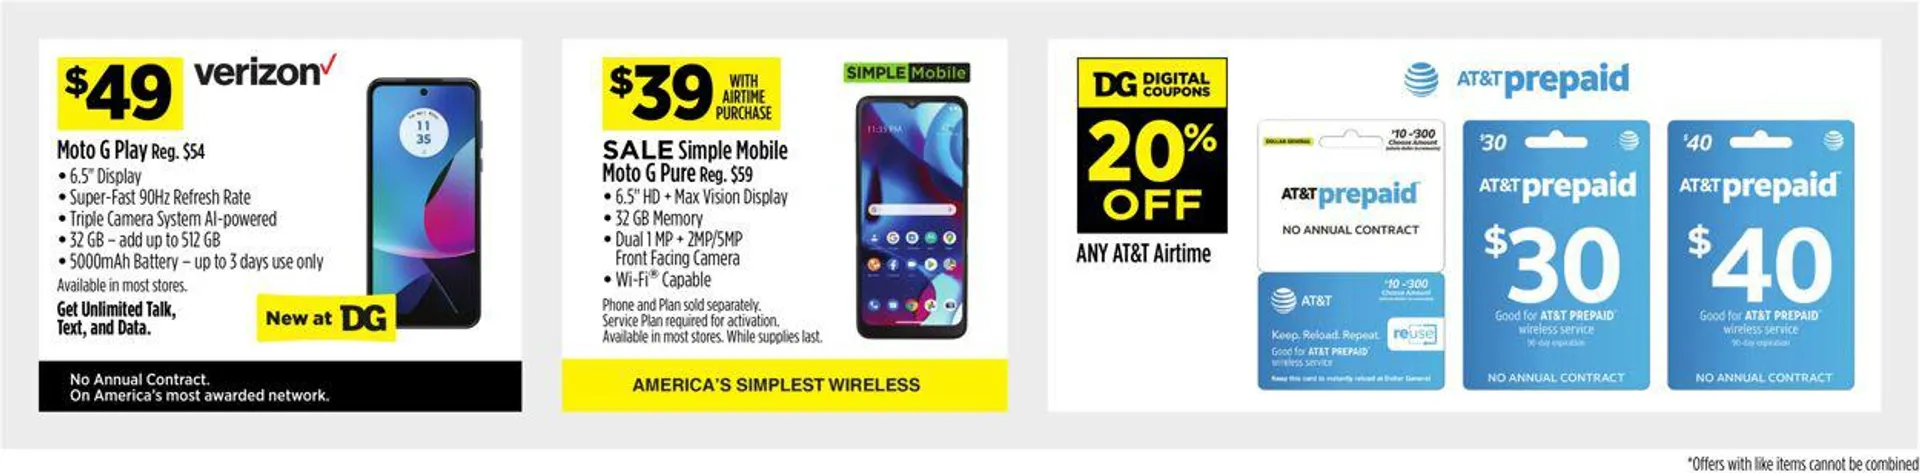 Dollar General Current weekly ad - 3